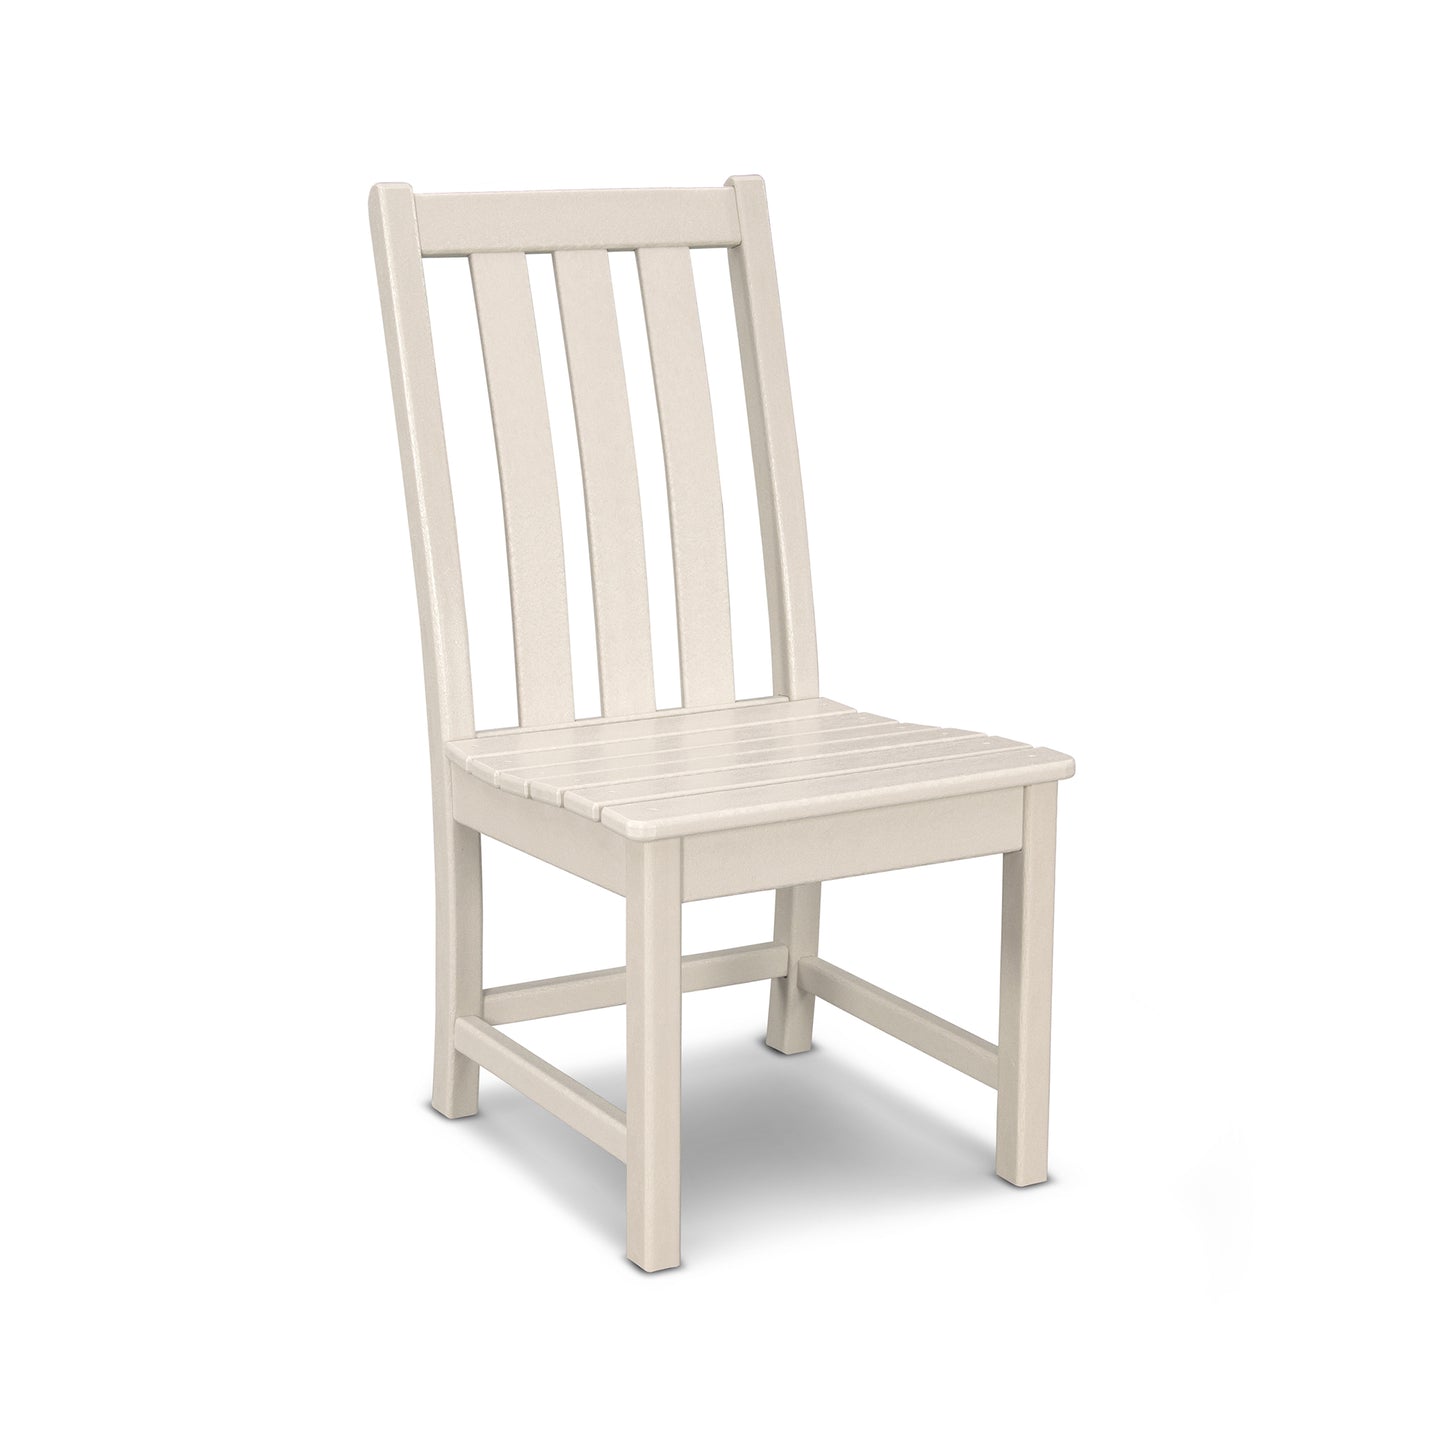 A simple beige POLYWOOD® Vineyard Dining Side Chair with a straight back and five vertical slats, standing isolated against a plain white background.